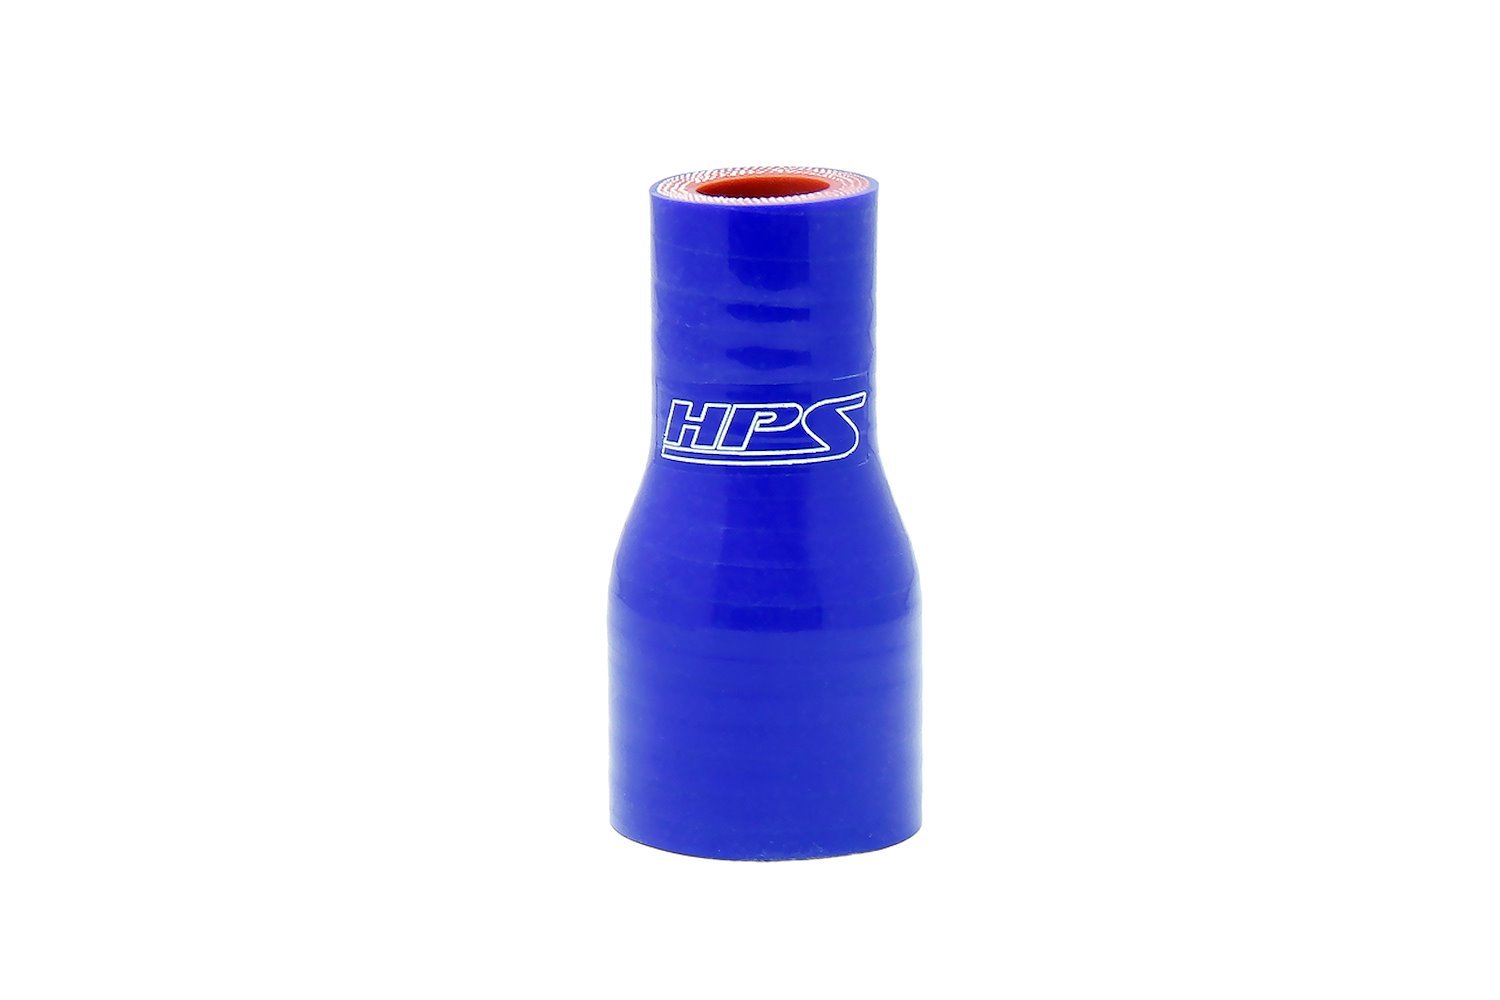 HTSR-087-100-BLUE Silicone Reducer Hose, High-Temp 4-Ply Reinforced, 7/8 in. - 1 in. ID, 3 in. Long, Blue